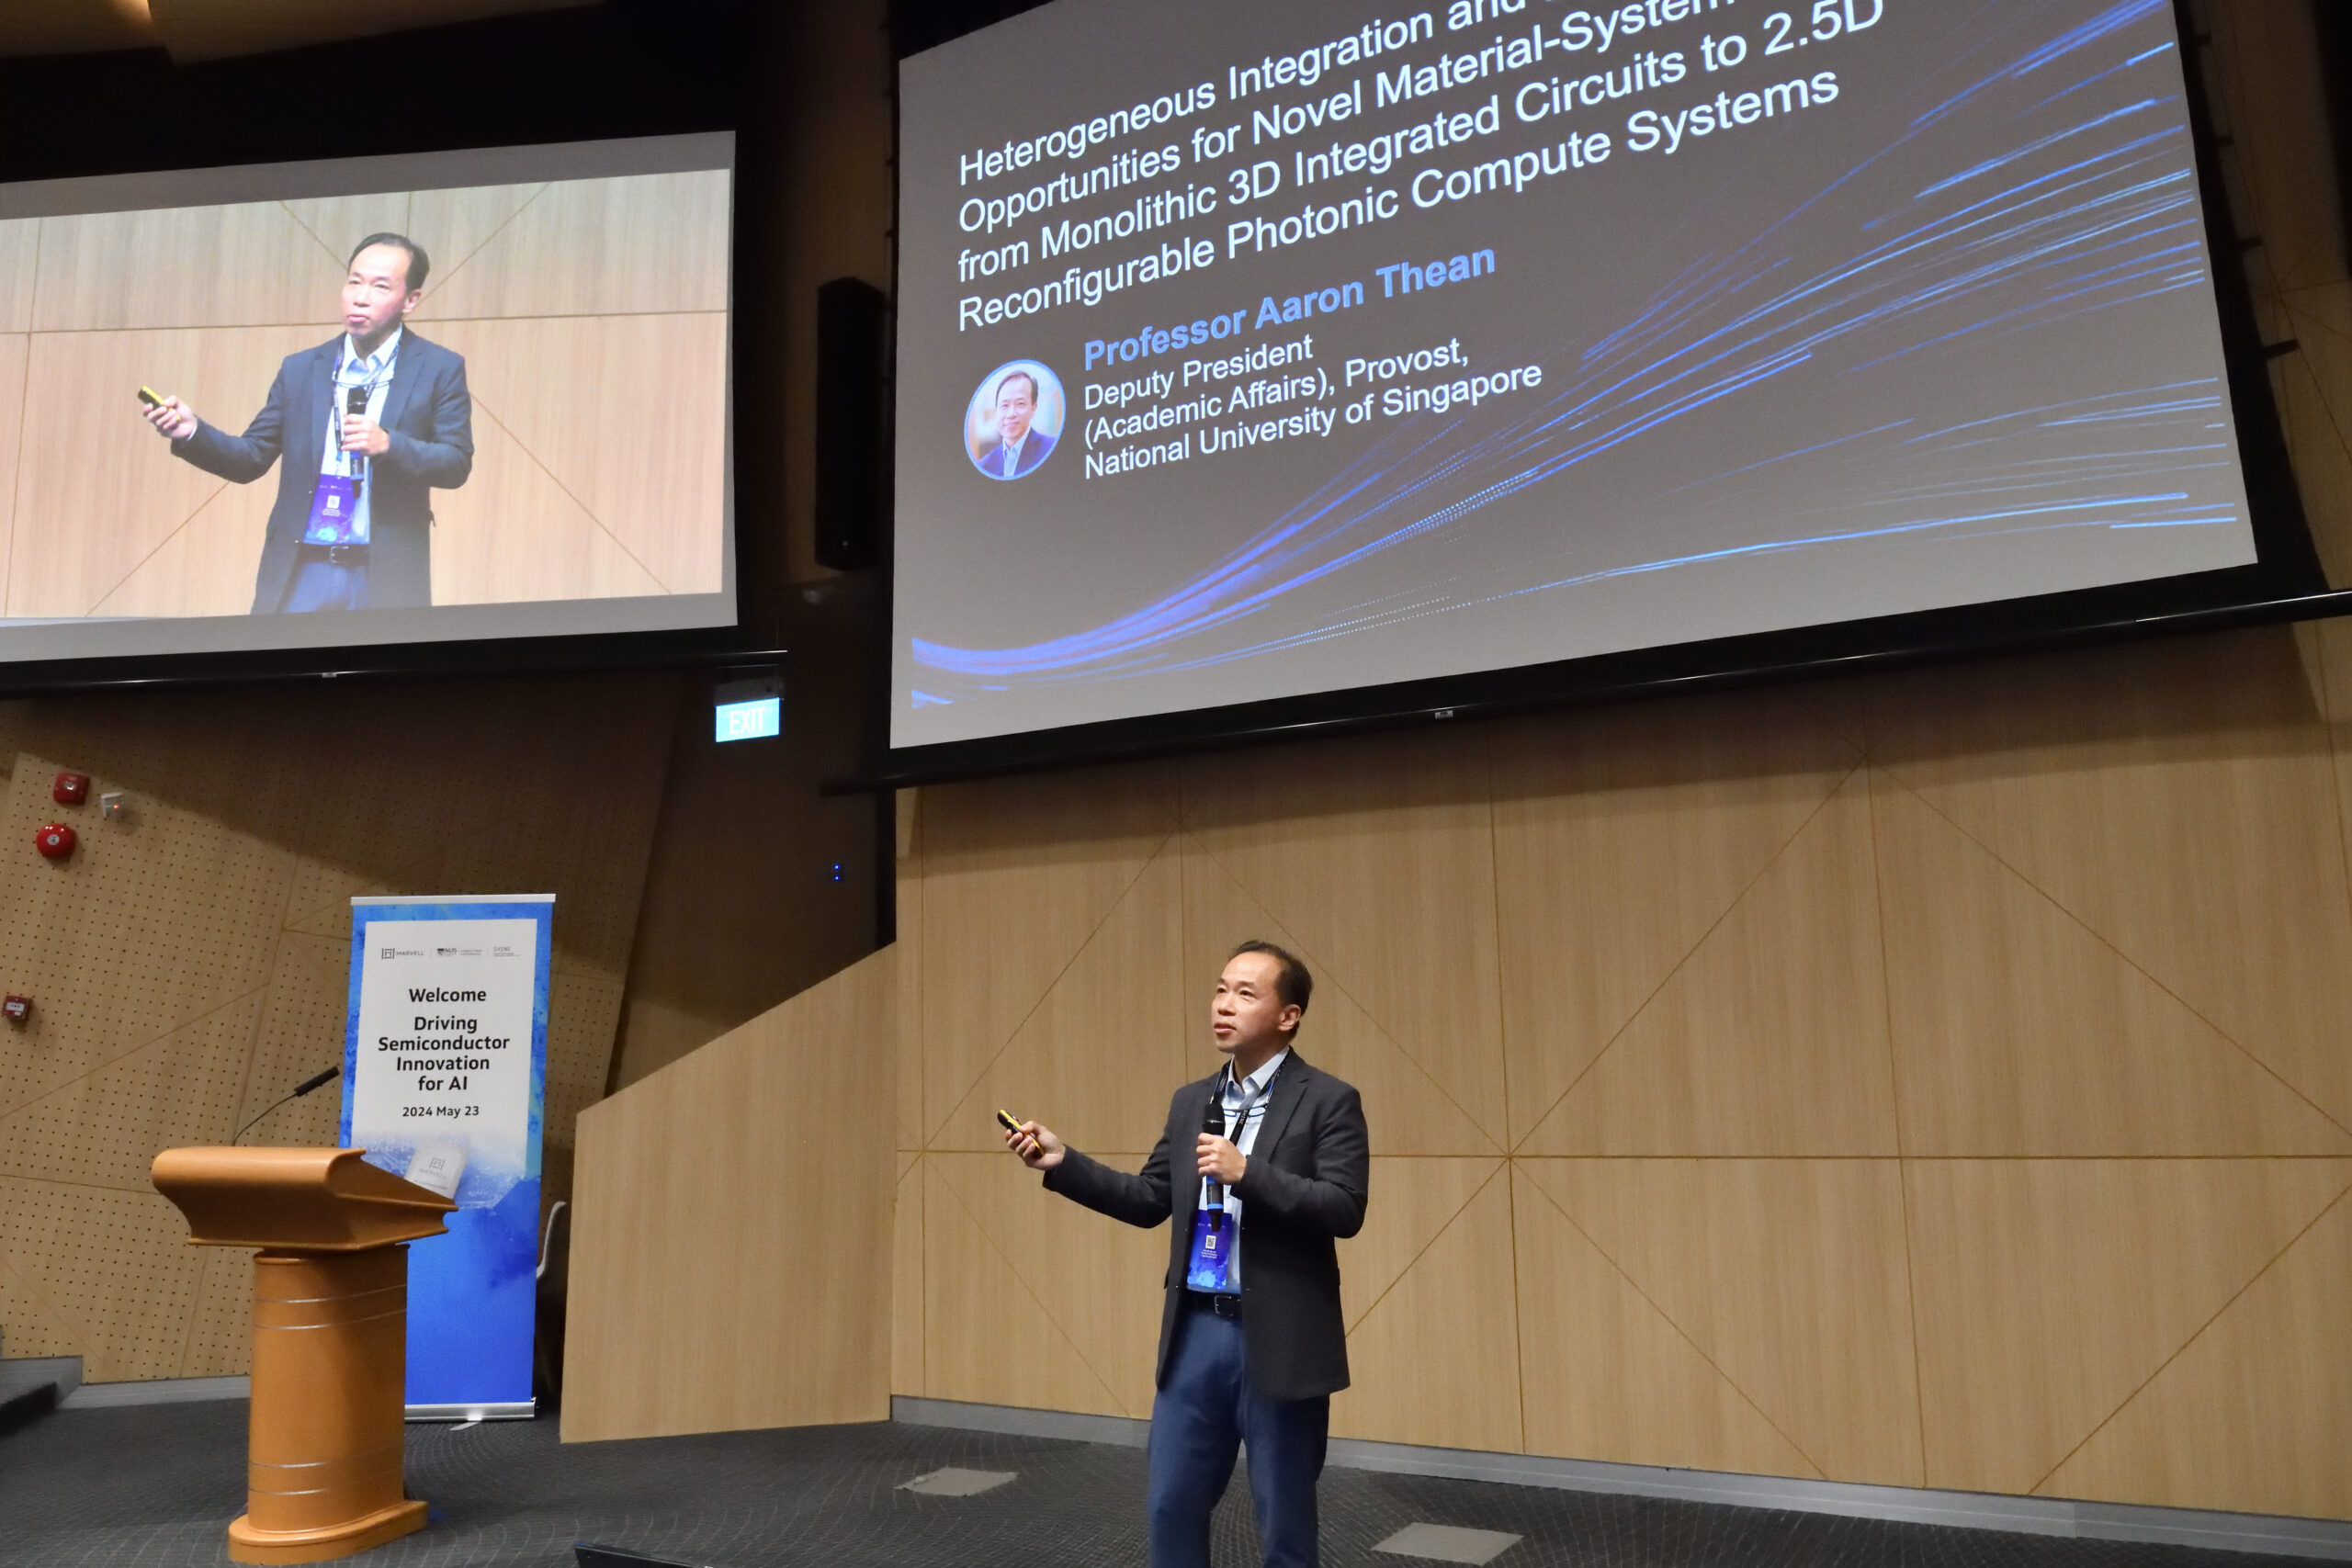 Keynote speaker Professor Aaron Thean, Deputy President (Academic Affairs) and Provost of NUS, outlined ways CDE and SHINE centre have been expanding the talent pool in the semiconductor industry.